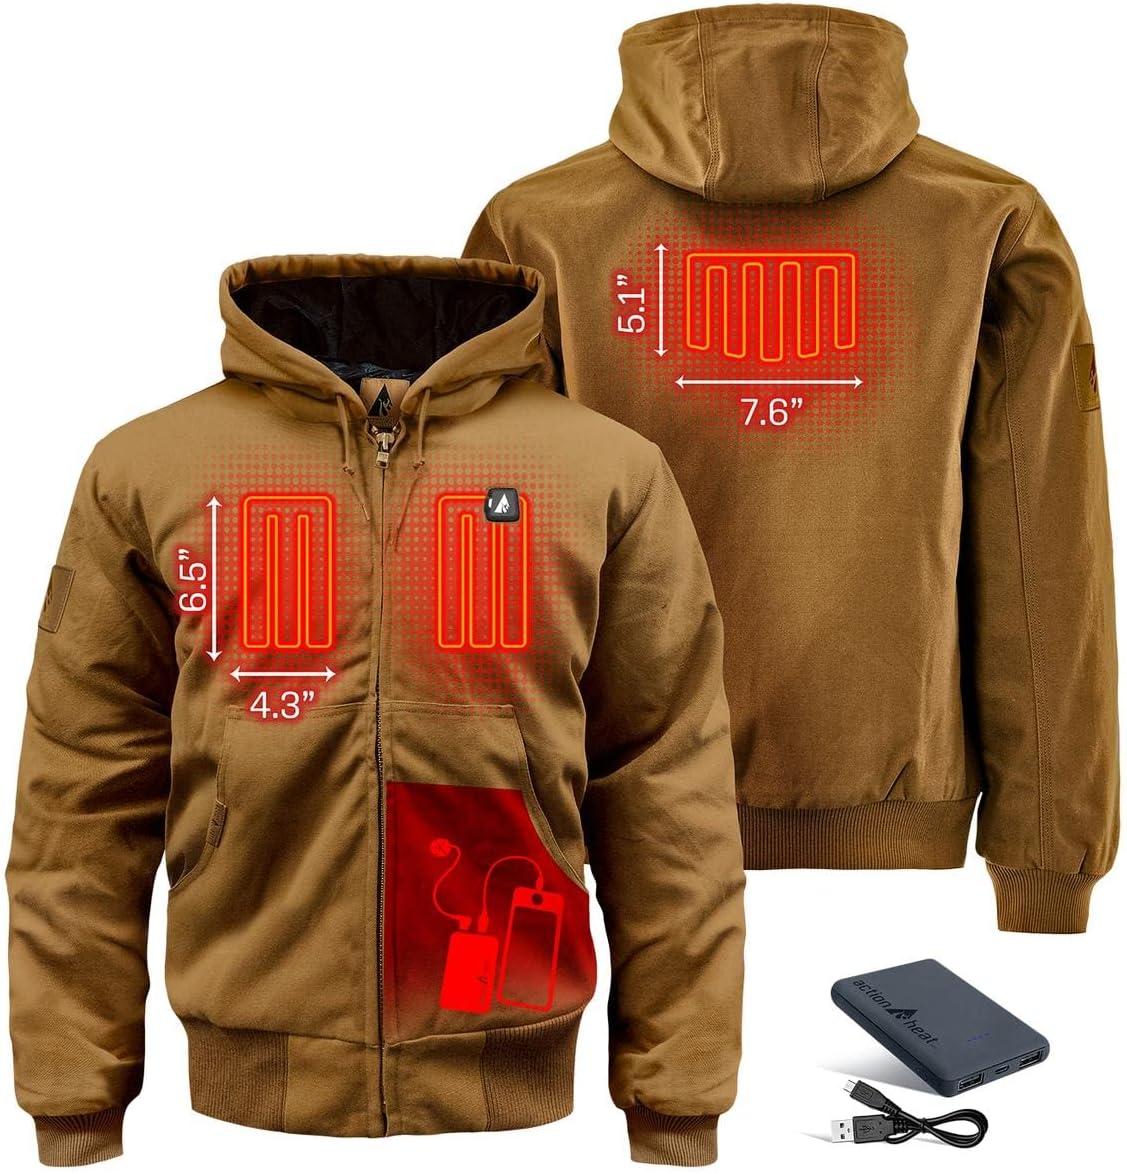 Heavy-Duty Heated Work Jacket with 5V Rechargeable, Size Large